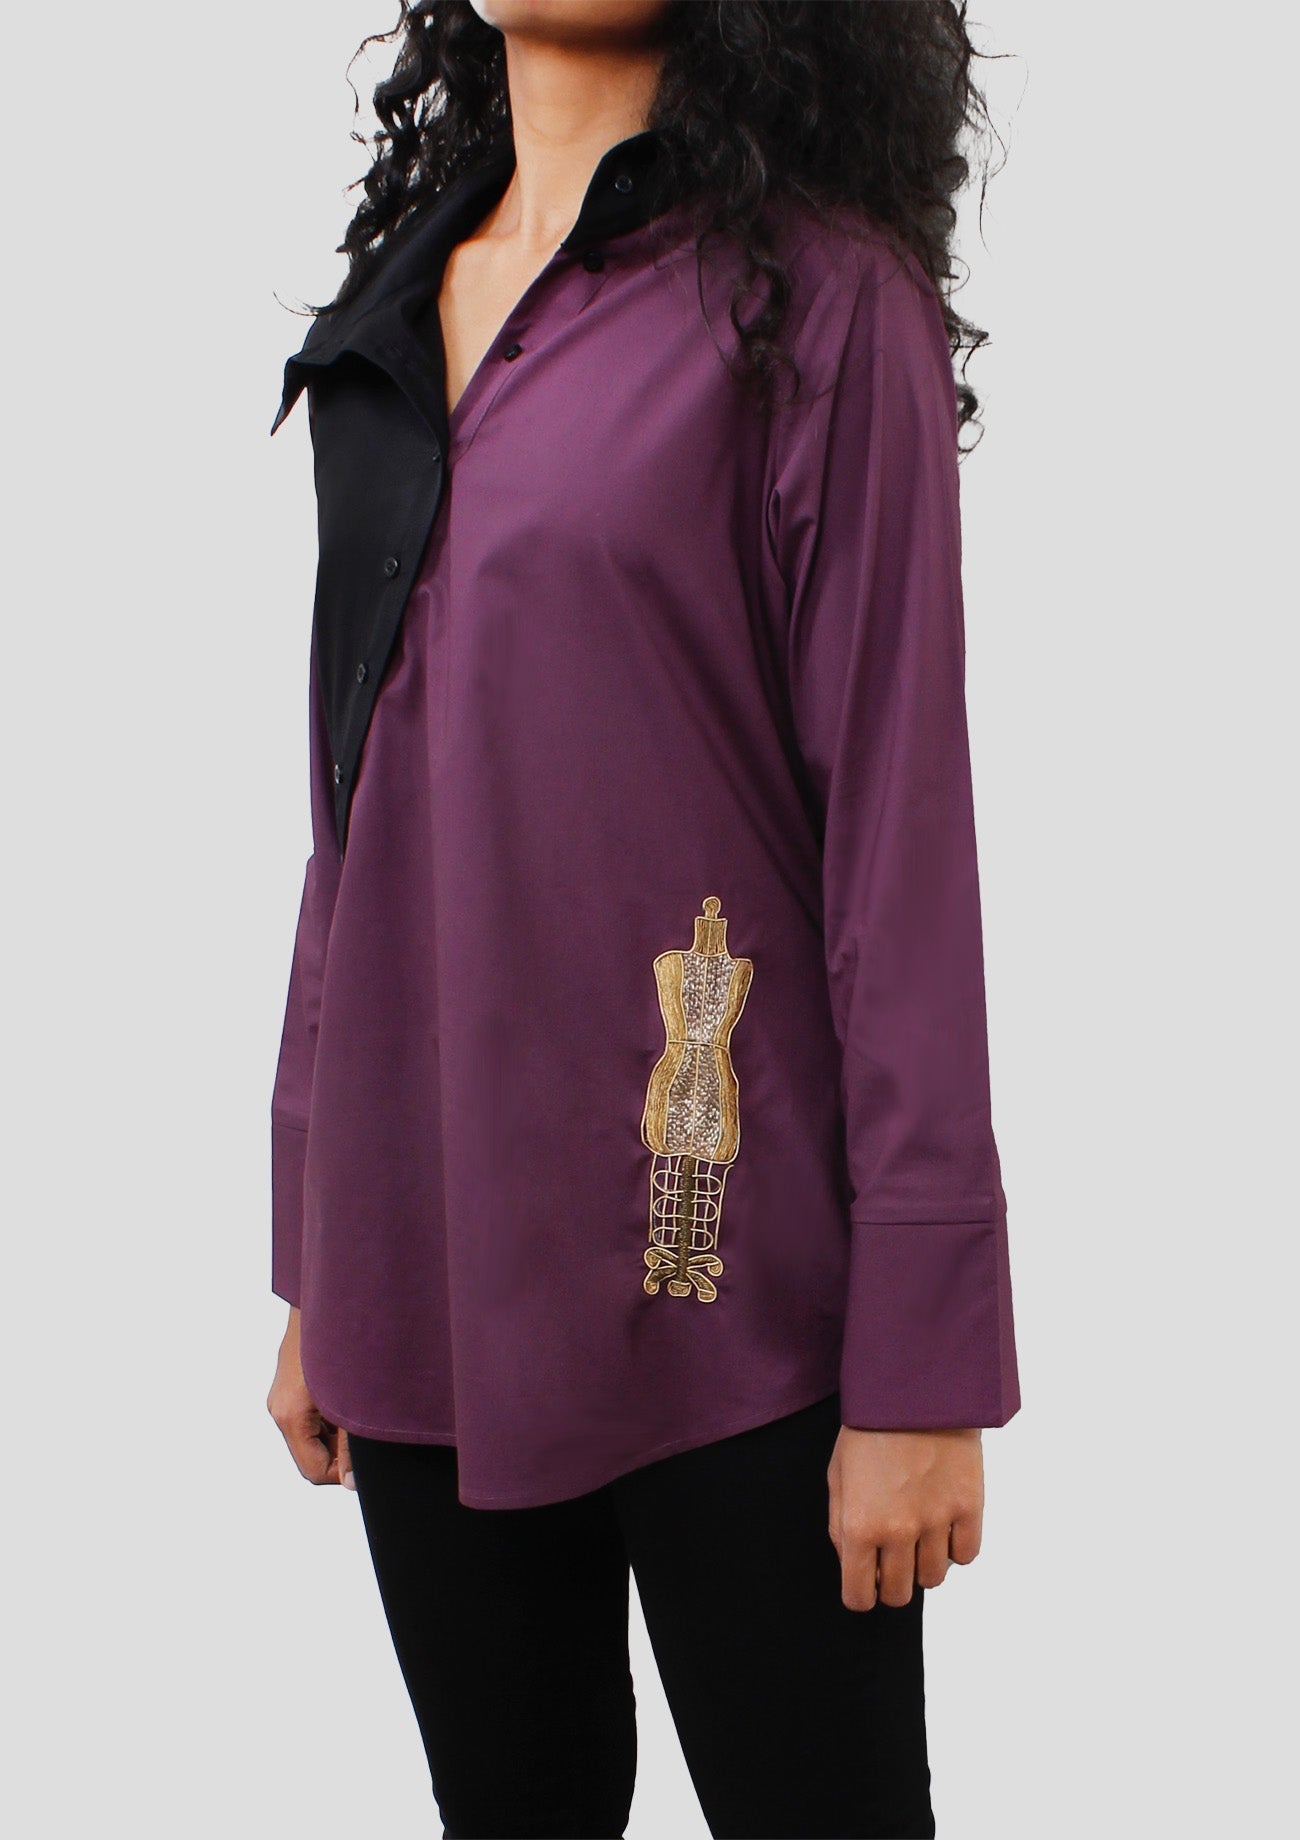 Black And Deep Purple Cotton Shirt With Asymmetrical Placket With Embroidery